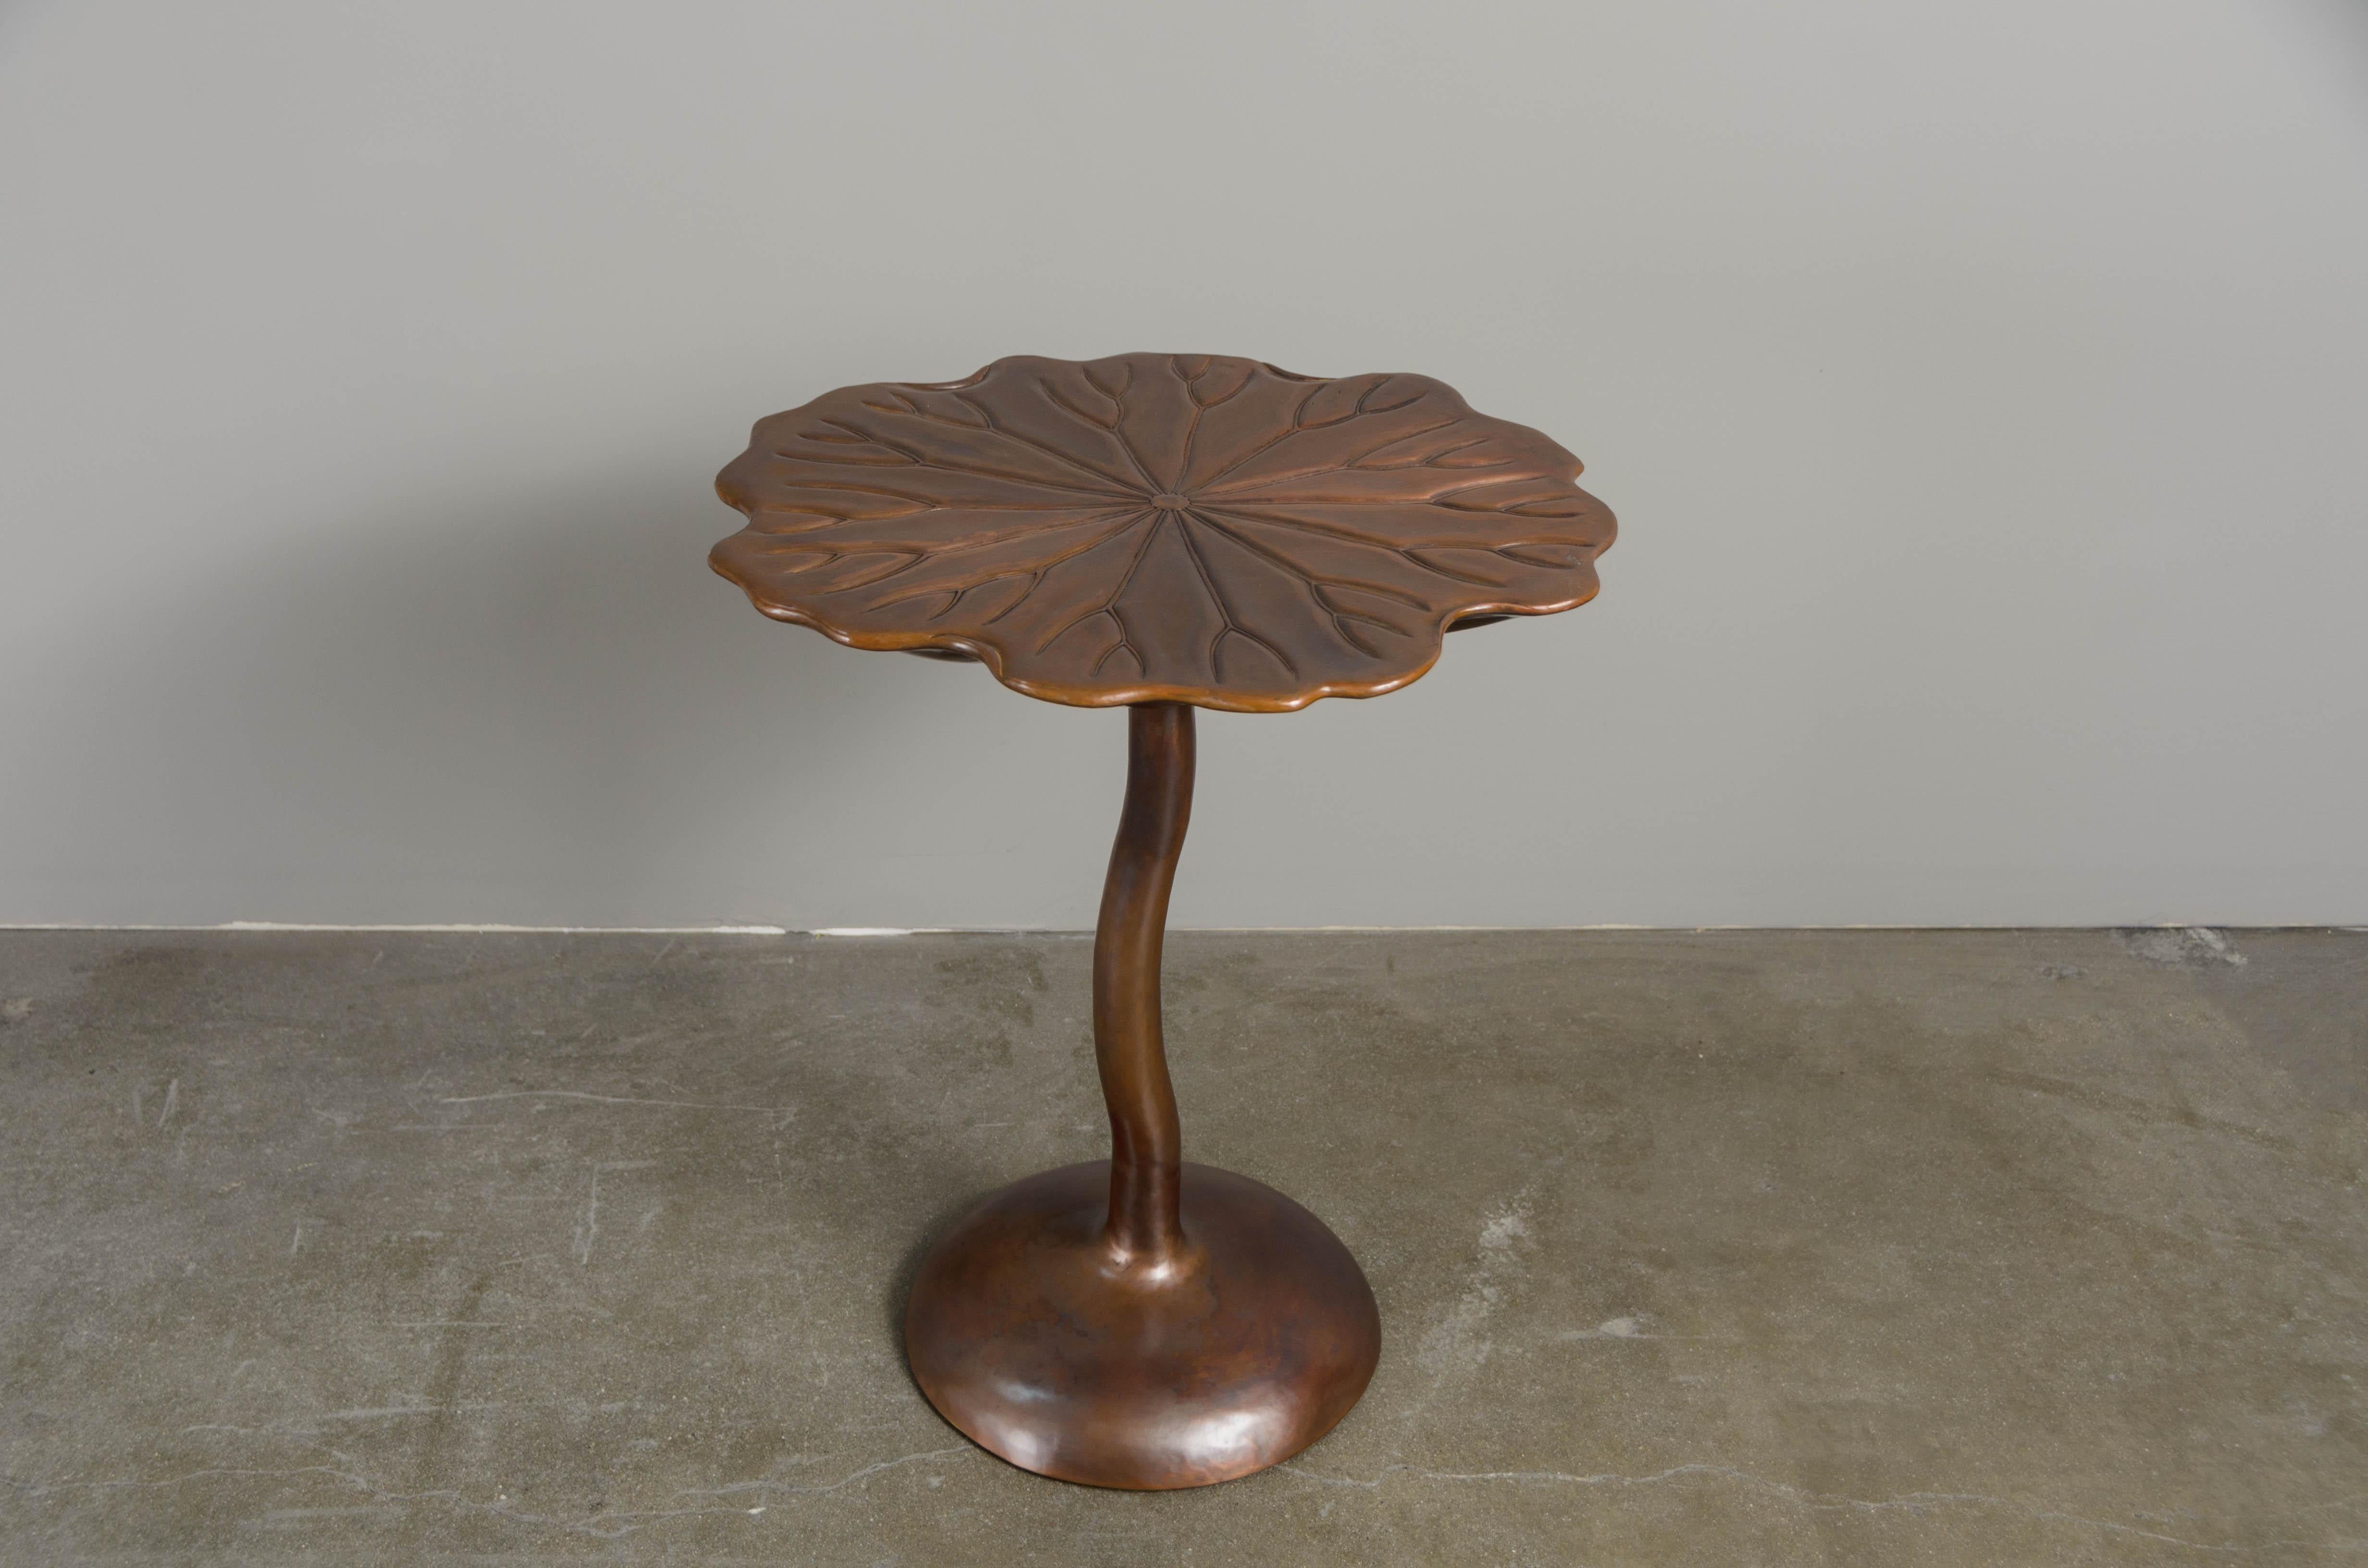 Water lily table
Antique Copper 
Hand Repoussé
Limited Edition
Contemporary
Each piece is individually crafted and is unique. 

Repoussé is the traditional art of hand-hammering decorative relief onto sheet metal. The technique originated